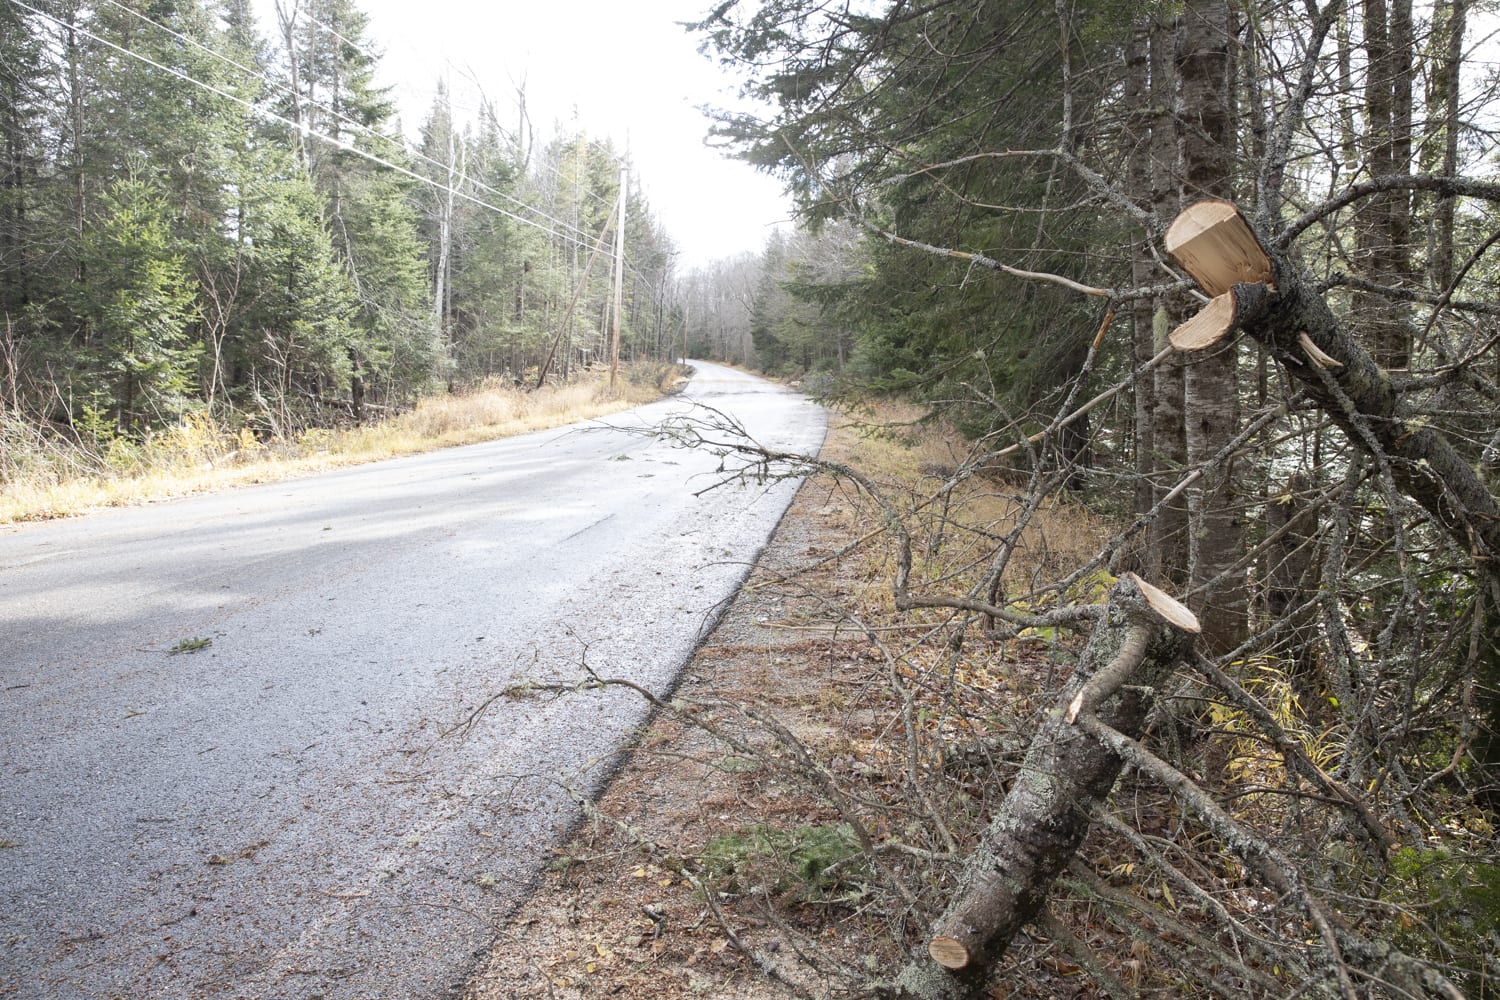 High winds downed trees, like this one on Adirondack Loj Road near Lake Placid, all over the Adirondacks during the Halloween storm. Photo by Mike Lynch